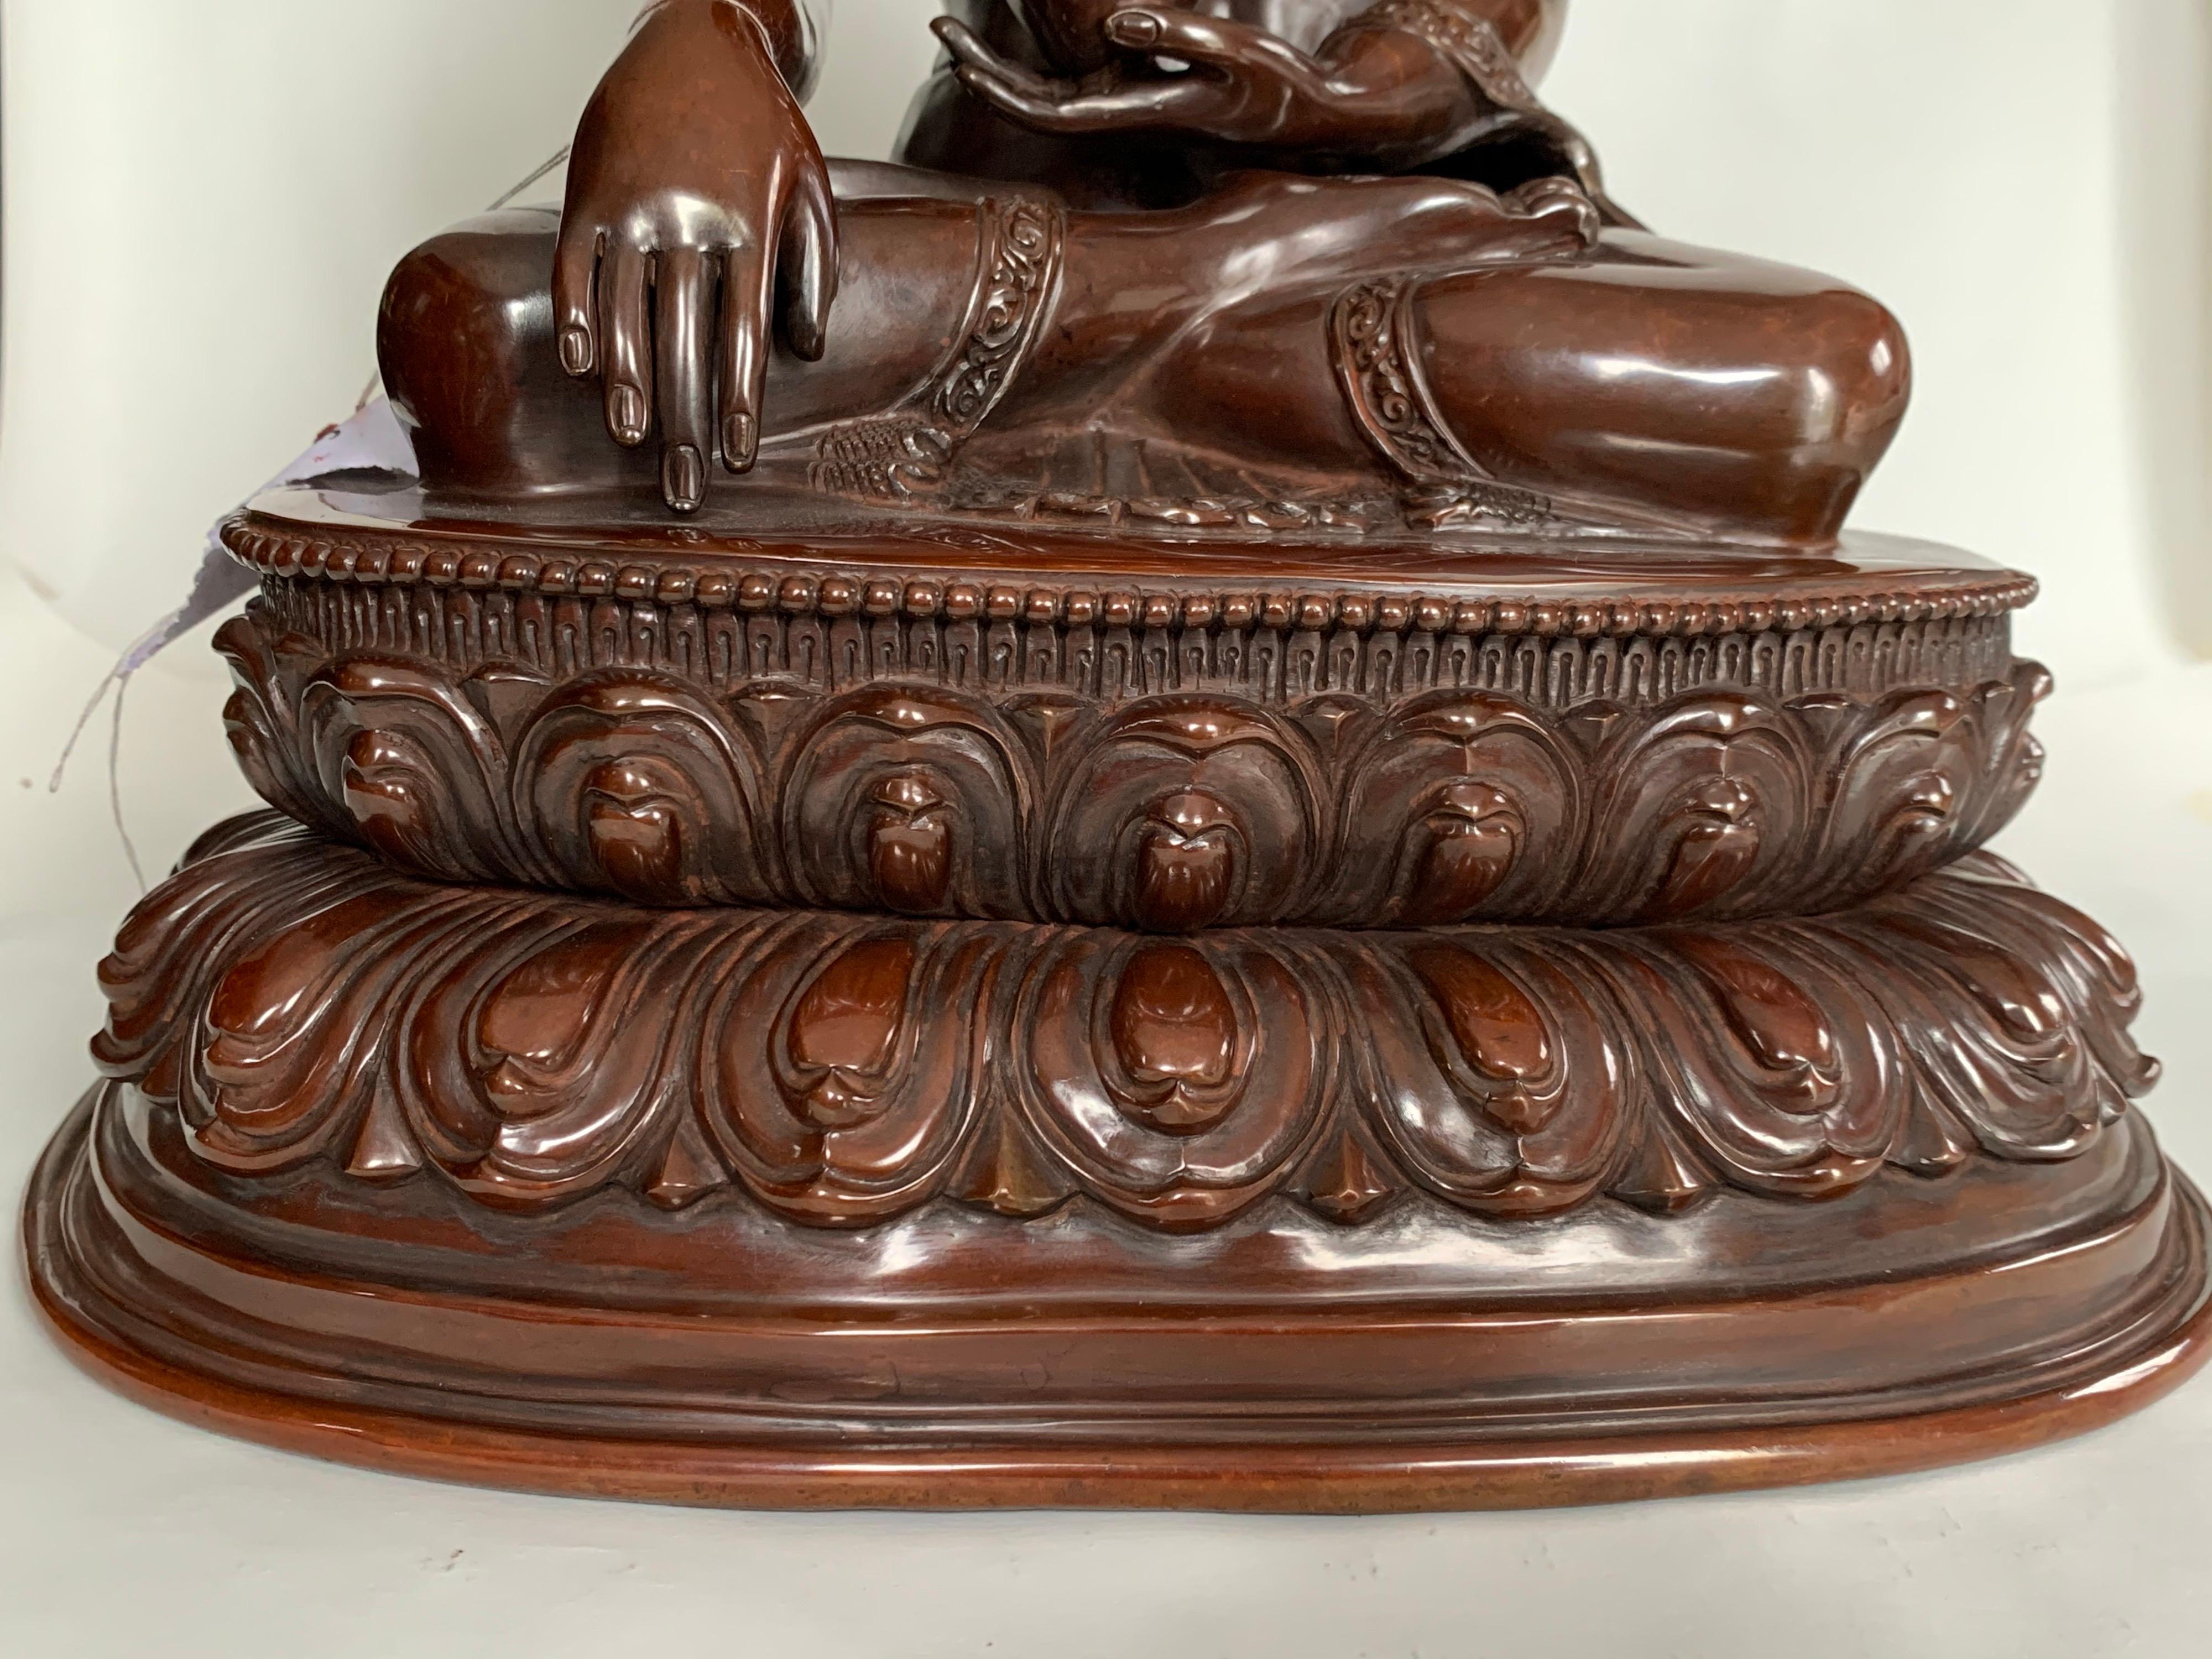 Buddha Statue 12 Inch Handcrafted by Lost Wax Process 3